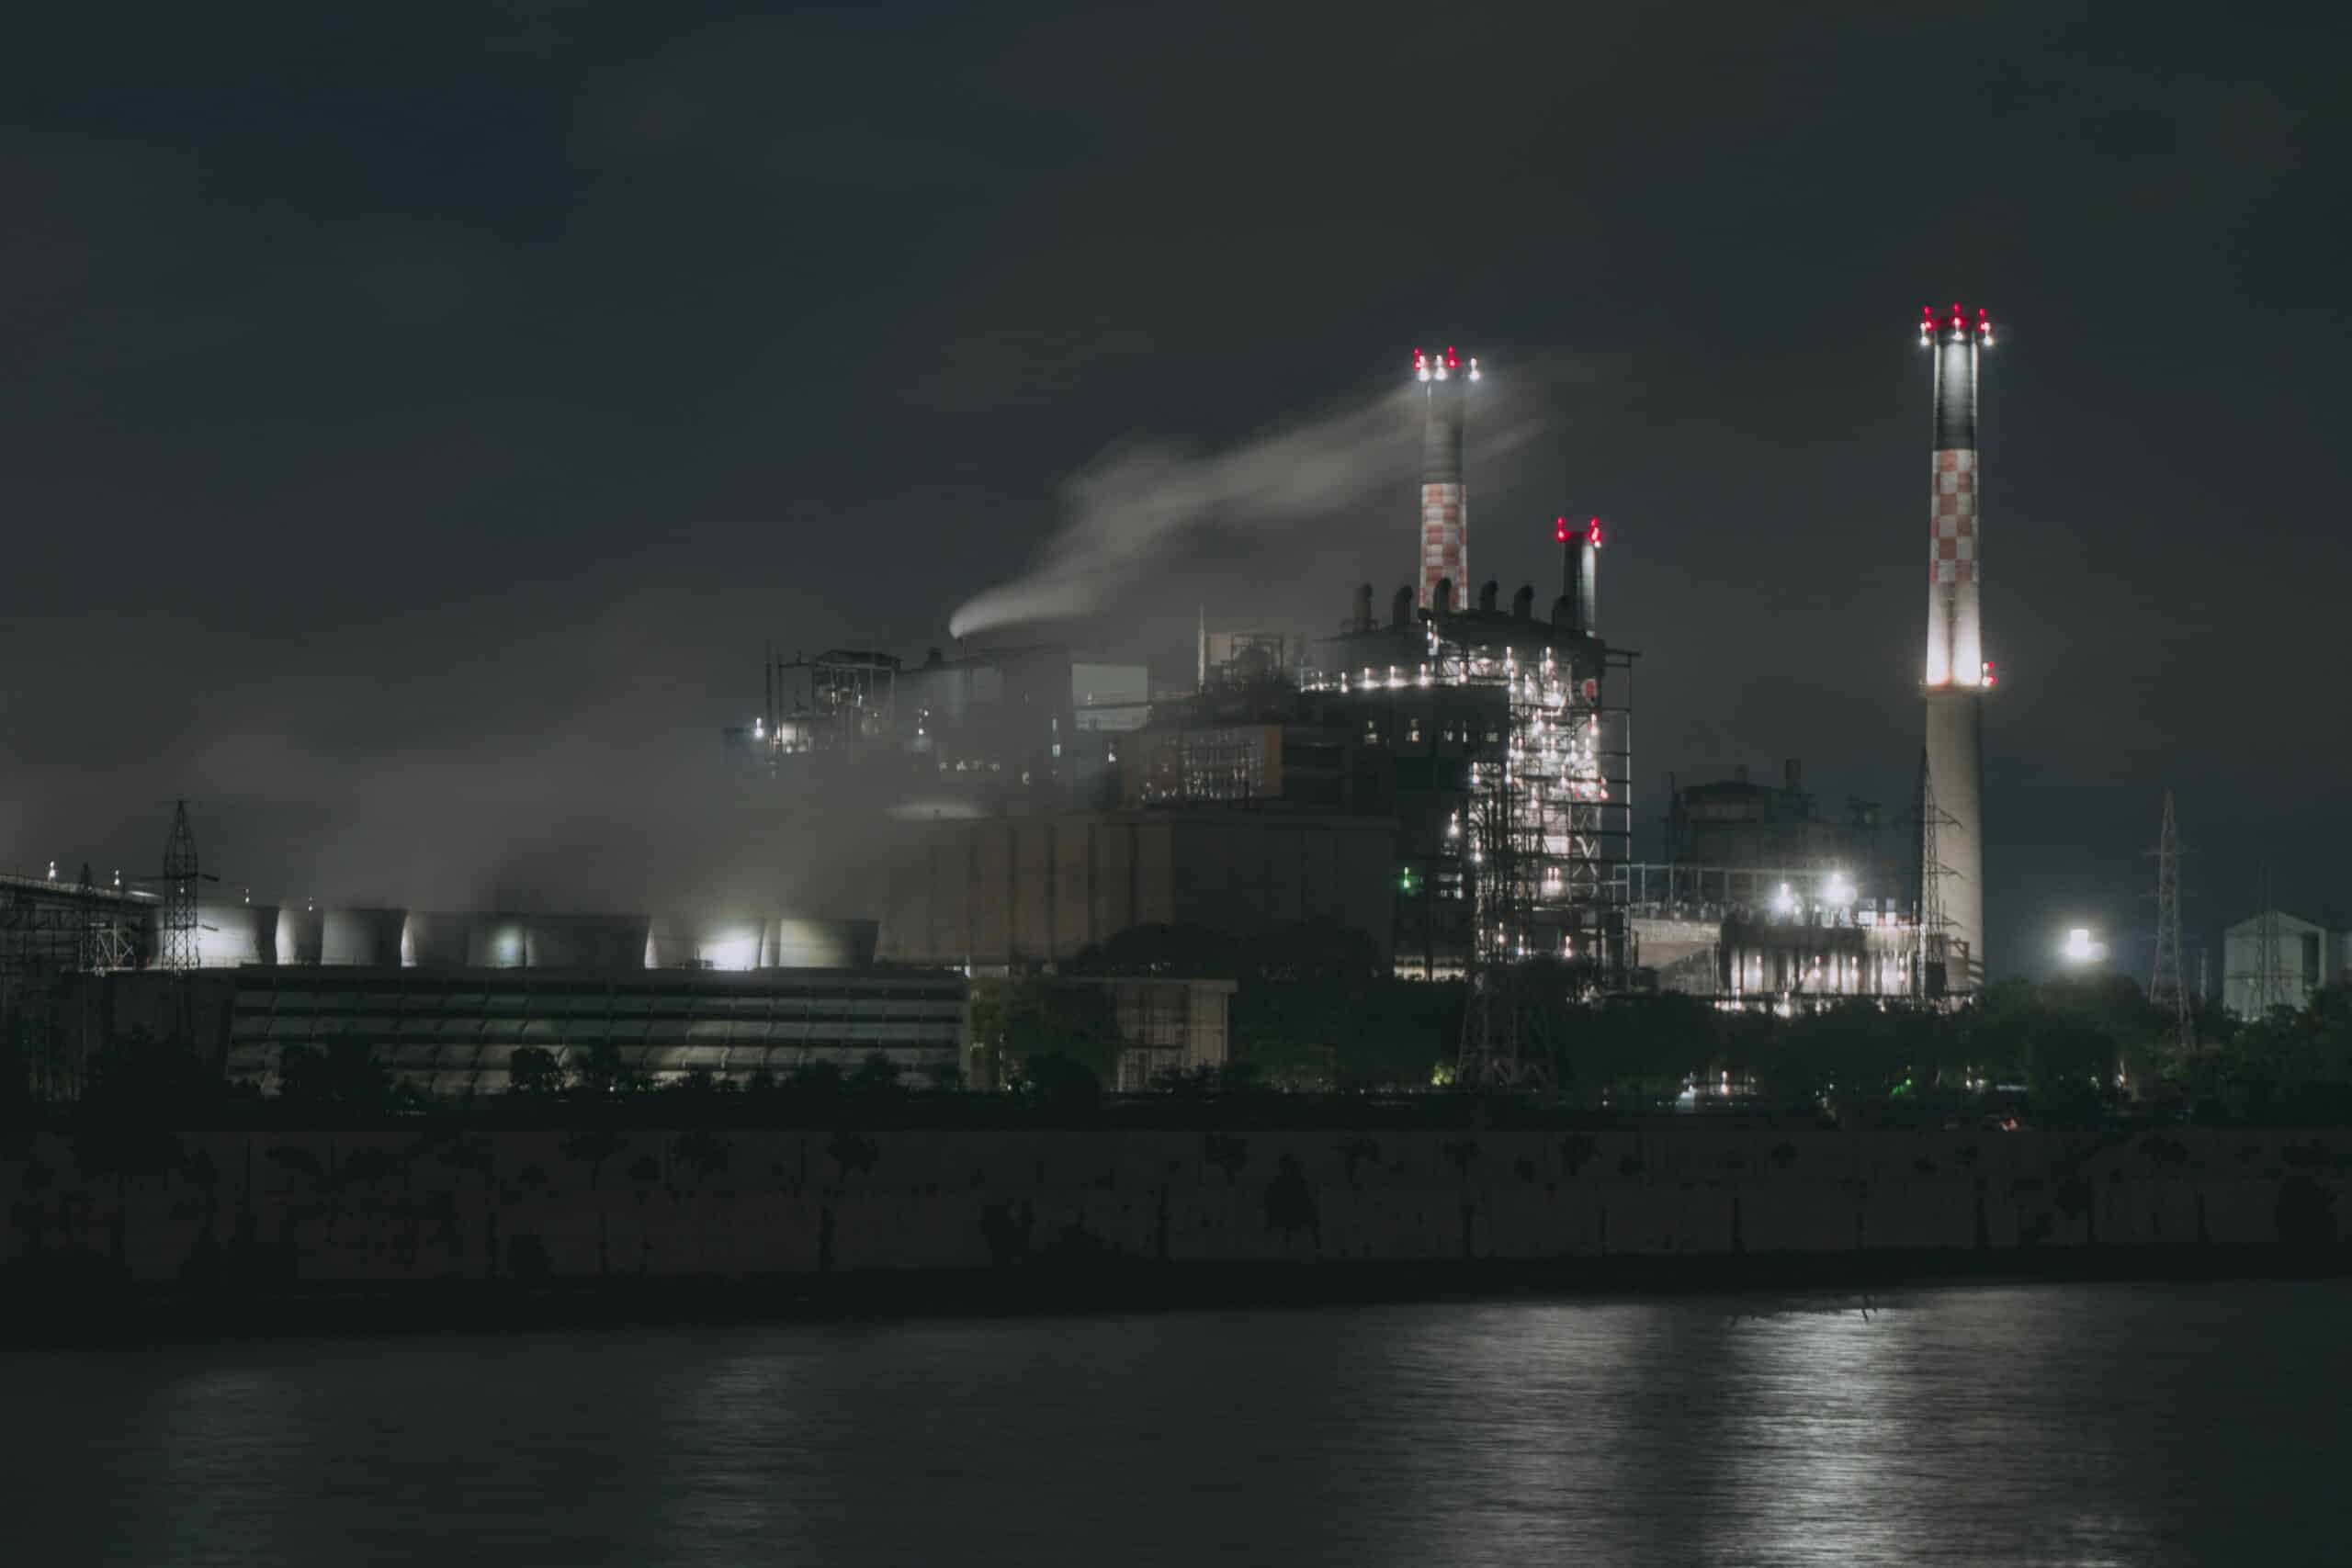 manufacturing building on a foggy night along the water